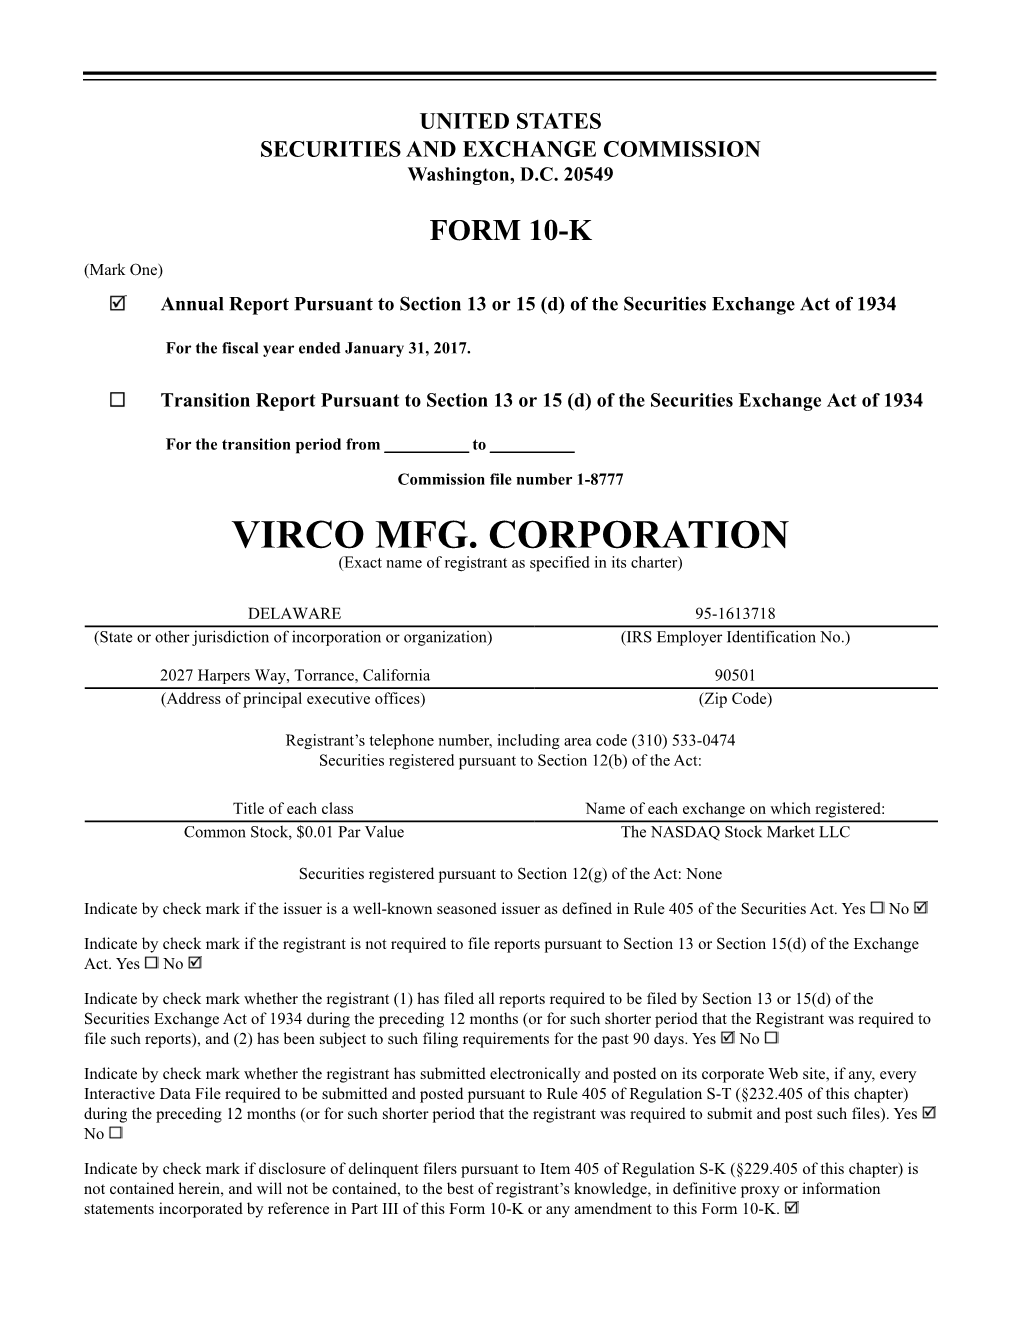 VIRCO MFG. CORPORATION (Exact Name of Registrant As Specified in Its Charter)